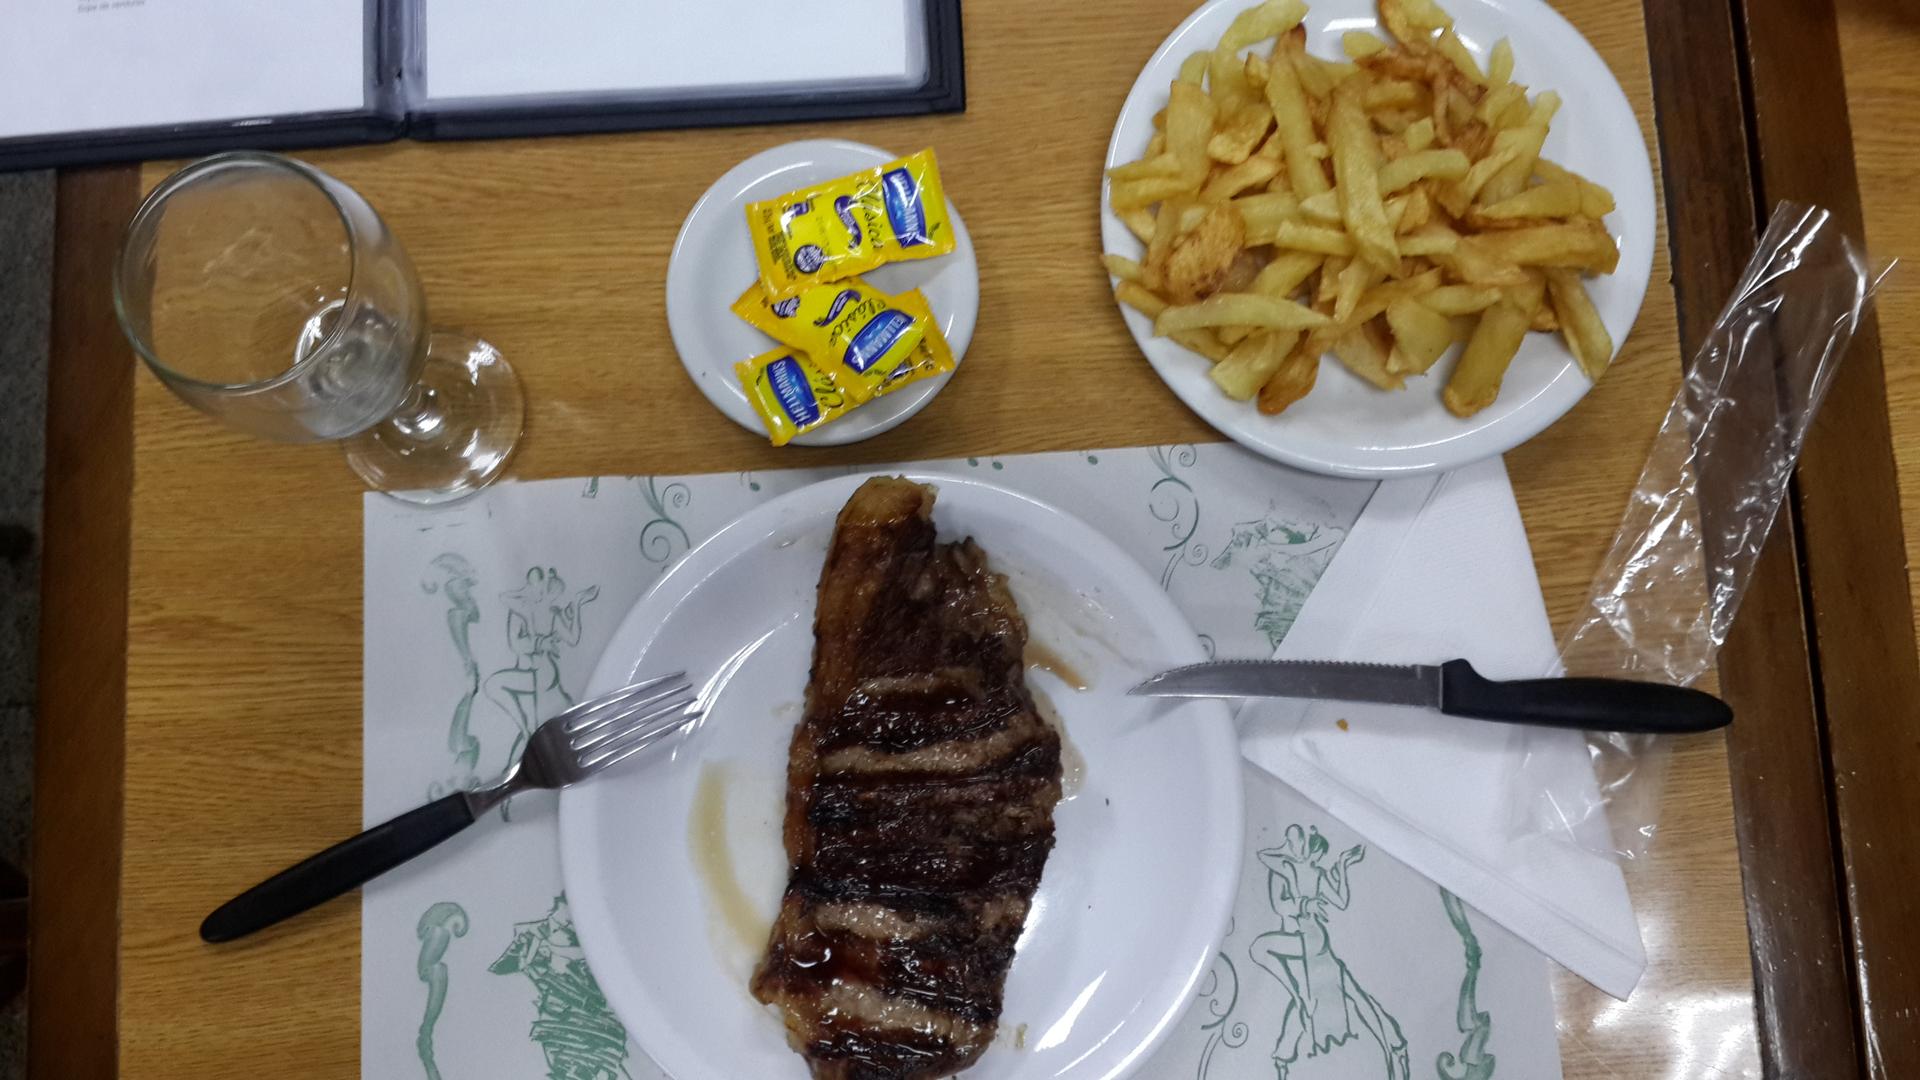 Beef and french fries in Buenos Aires city, Argentina. The ordering process in Spanish wasn't easy but I'm happy for the result.